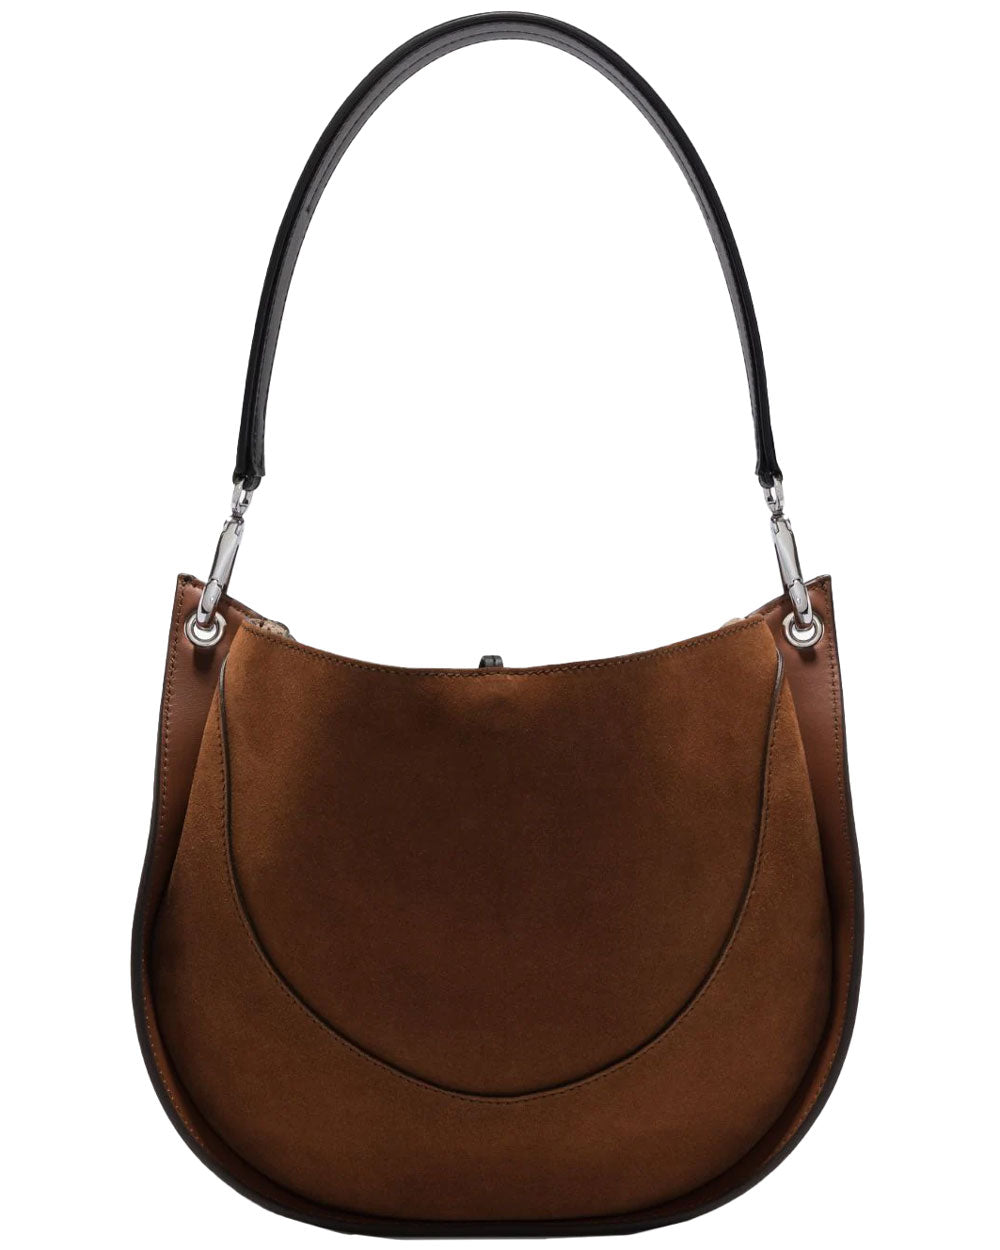 Arch Shoulder Bag in Chocolate